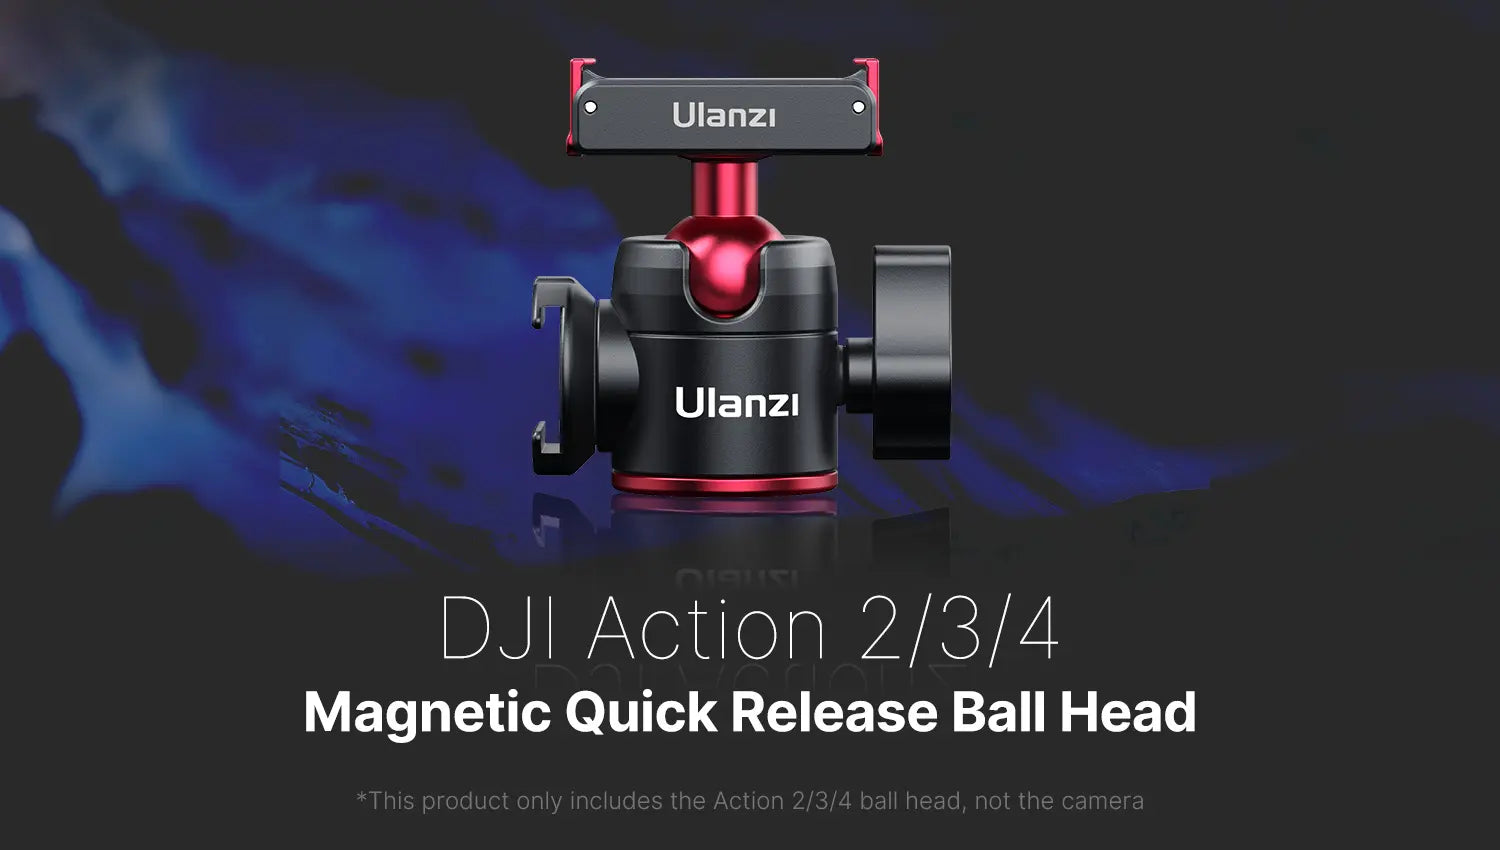 Ulanzi U-180 Magnetic Quick Release Ball Head for DJI Action 2/3/4 2842A